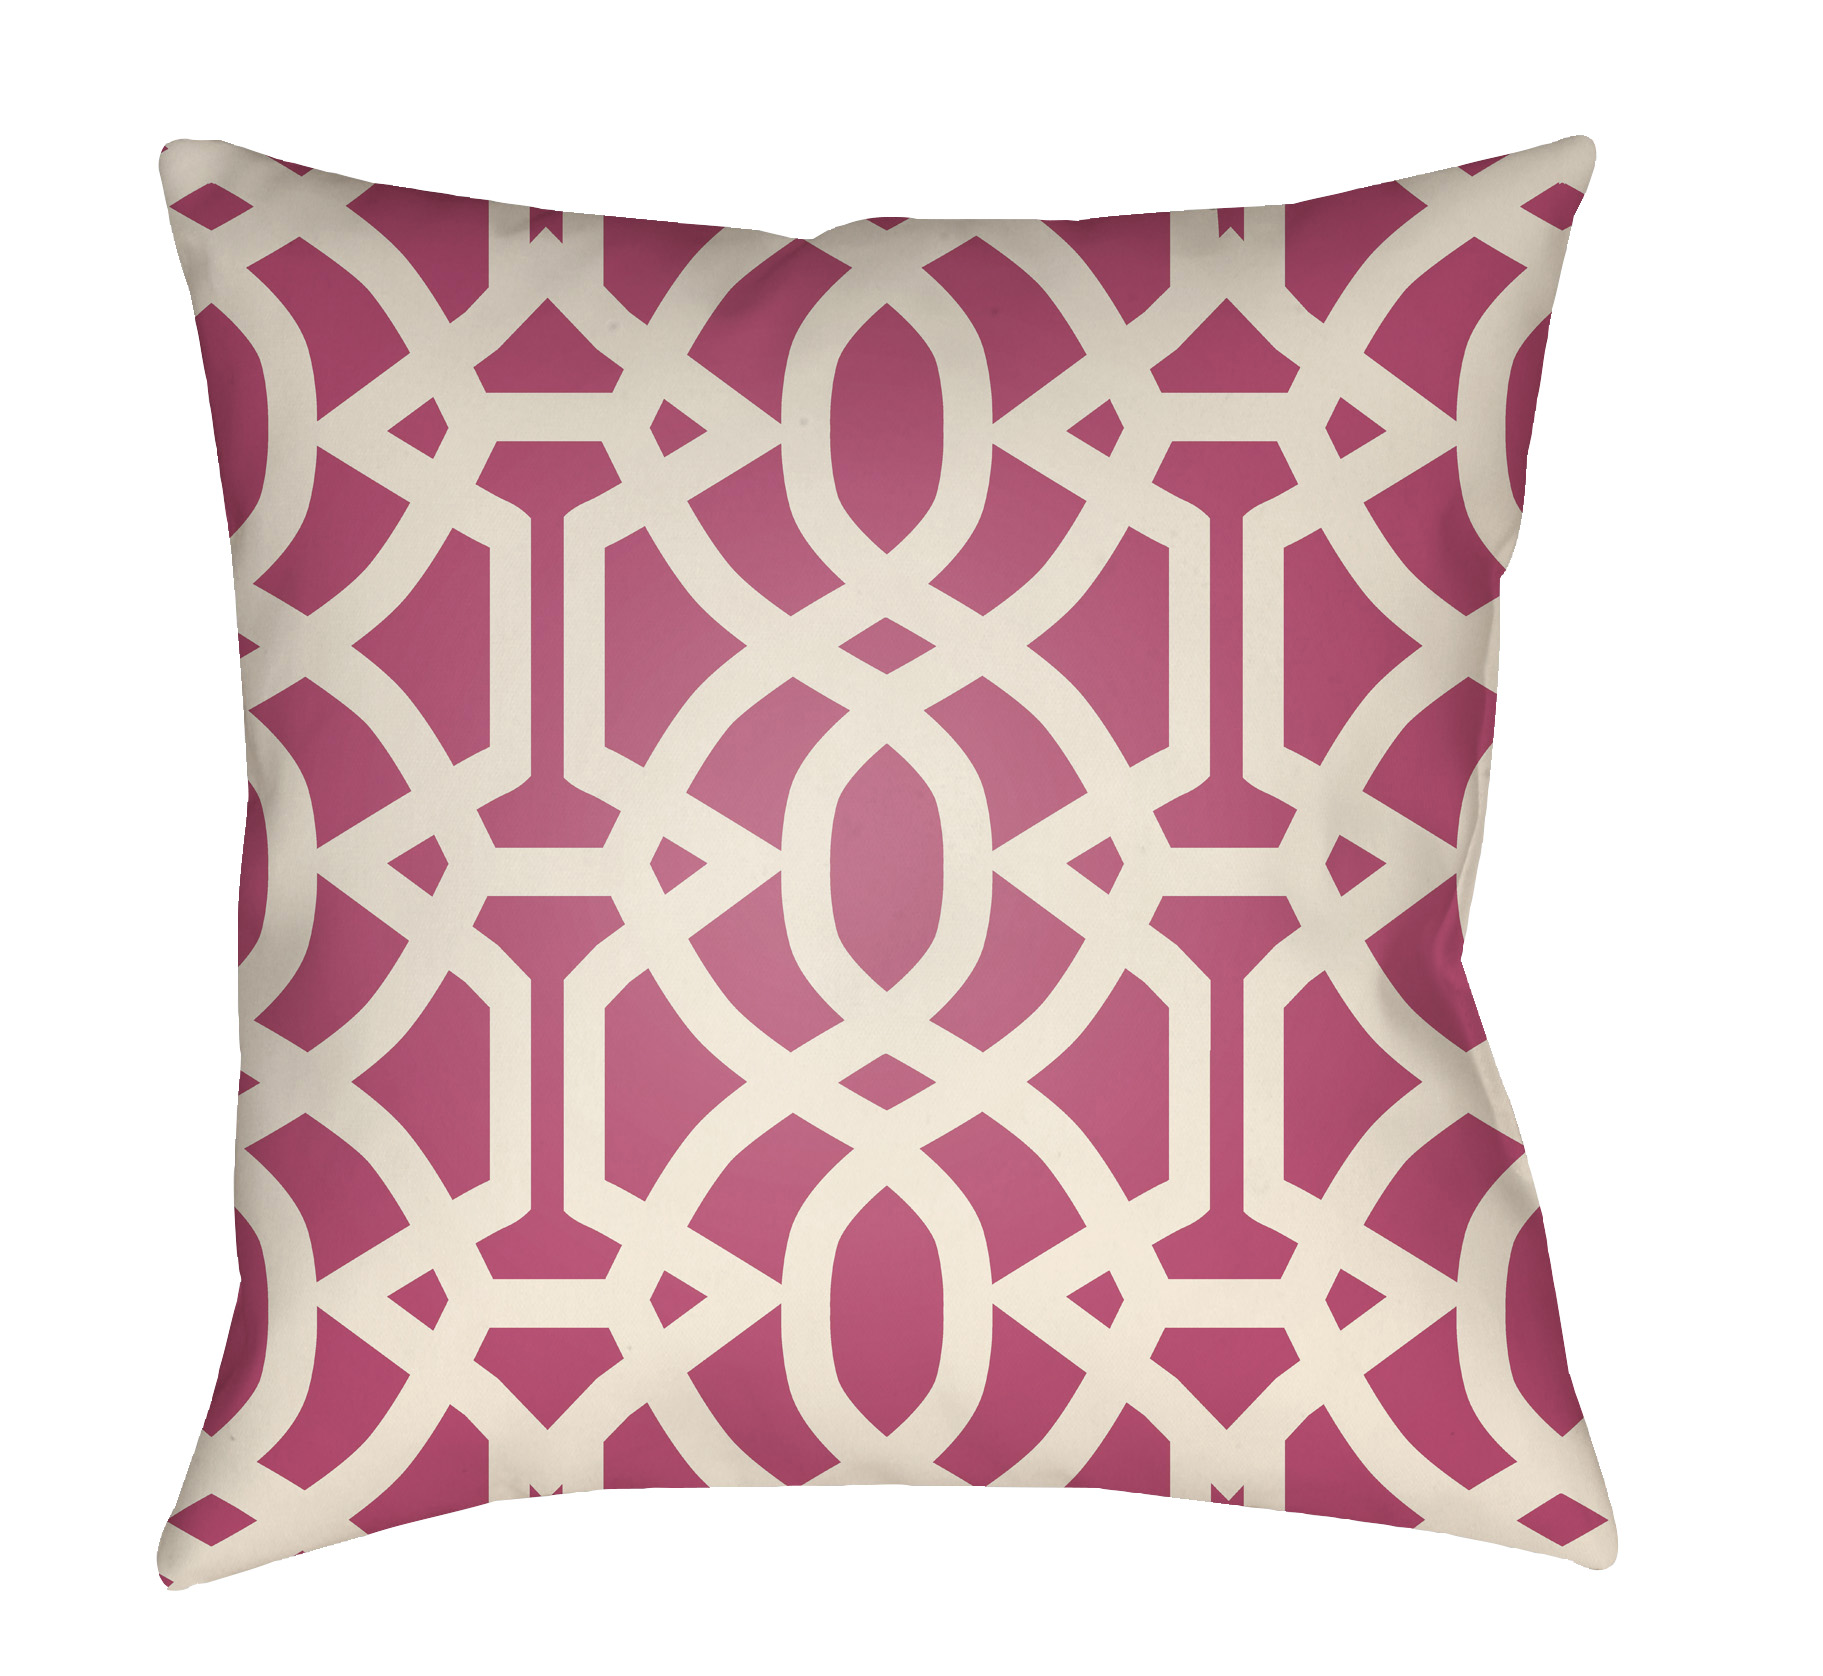 Ready to Ship Outdoor Pillow Cover in Schumacher Trellis Print in Sand